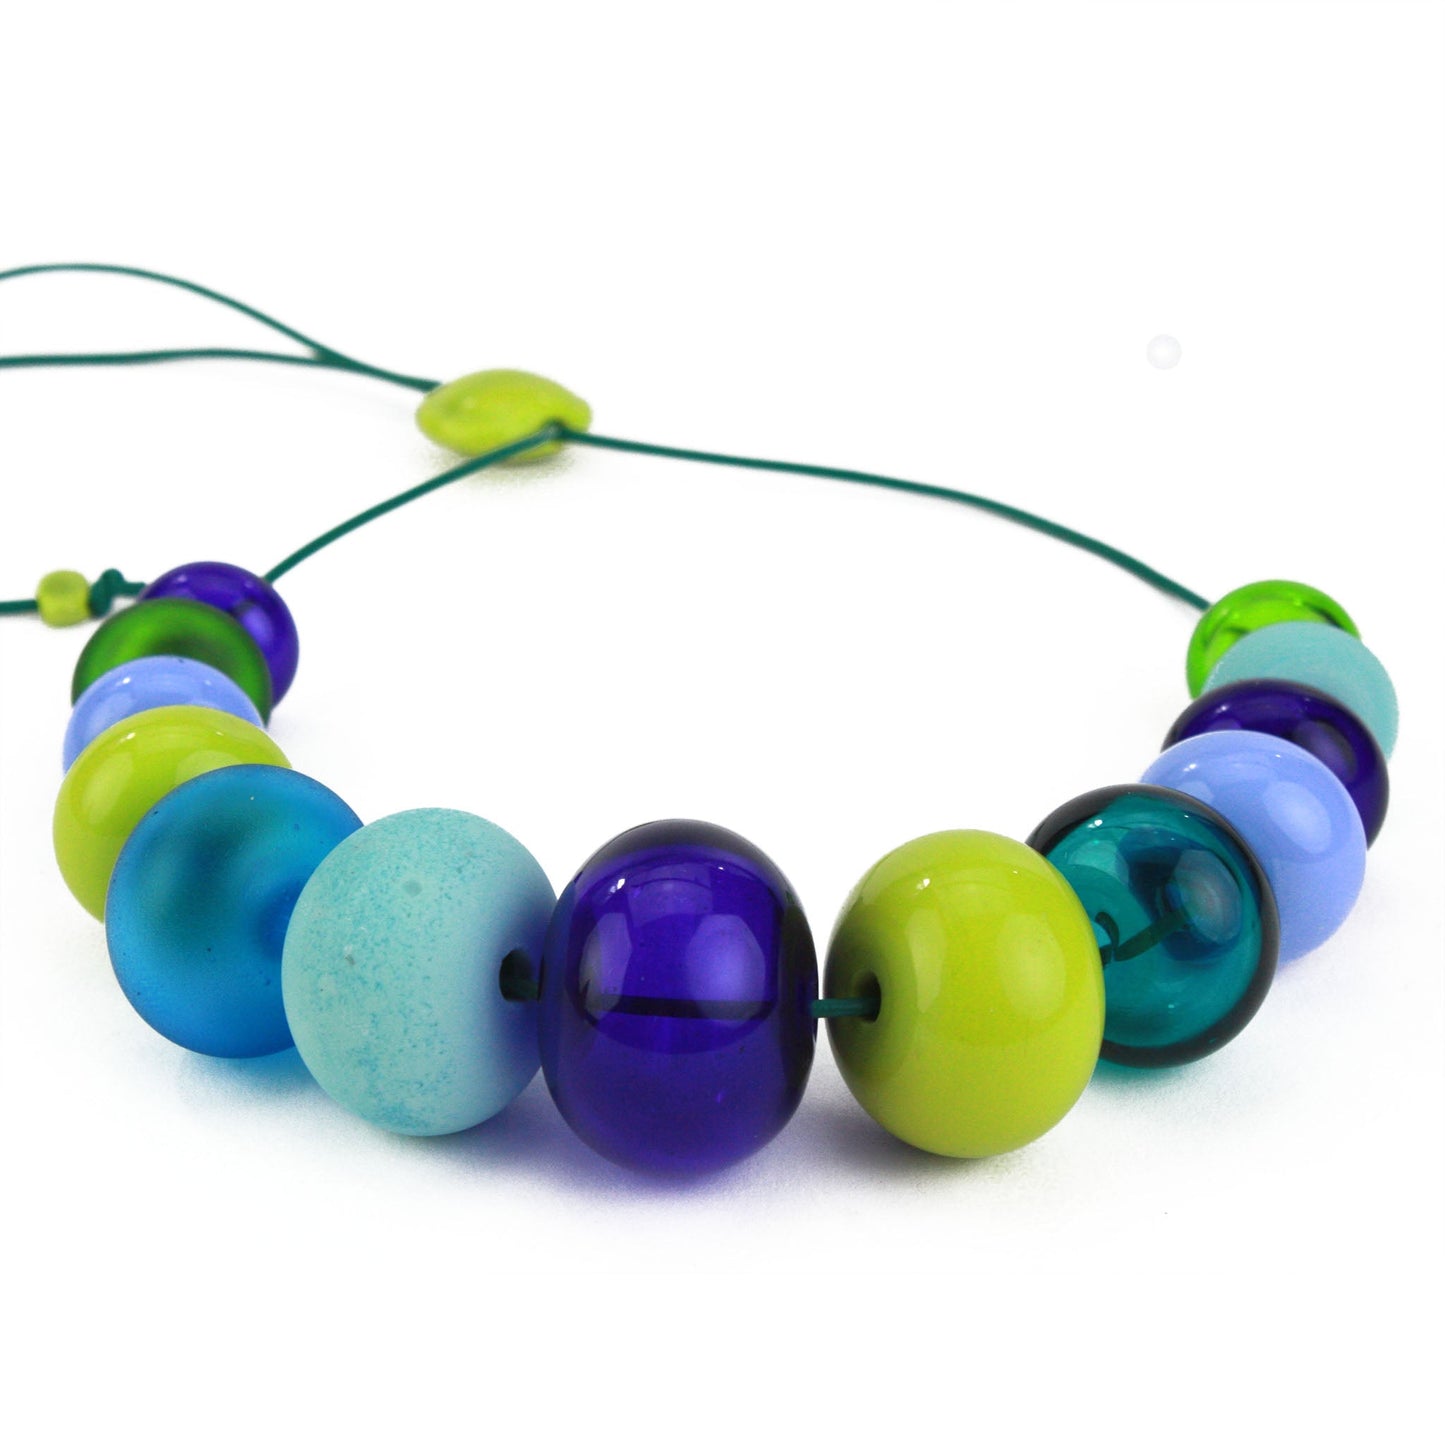 13 bead Bubble necklace - blues and greens